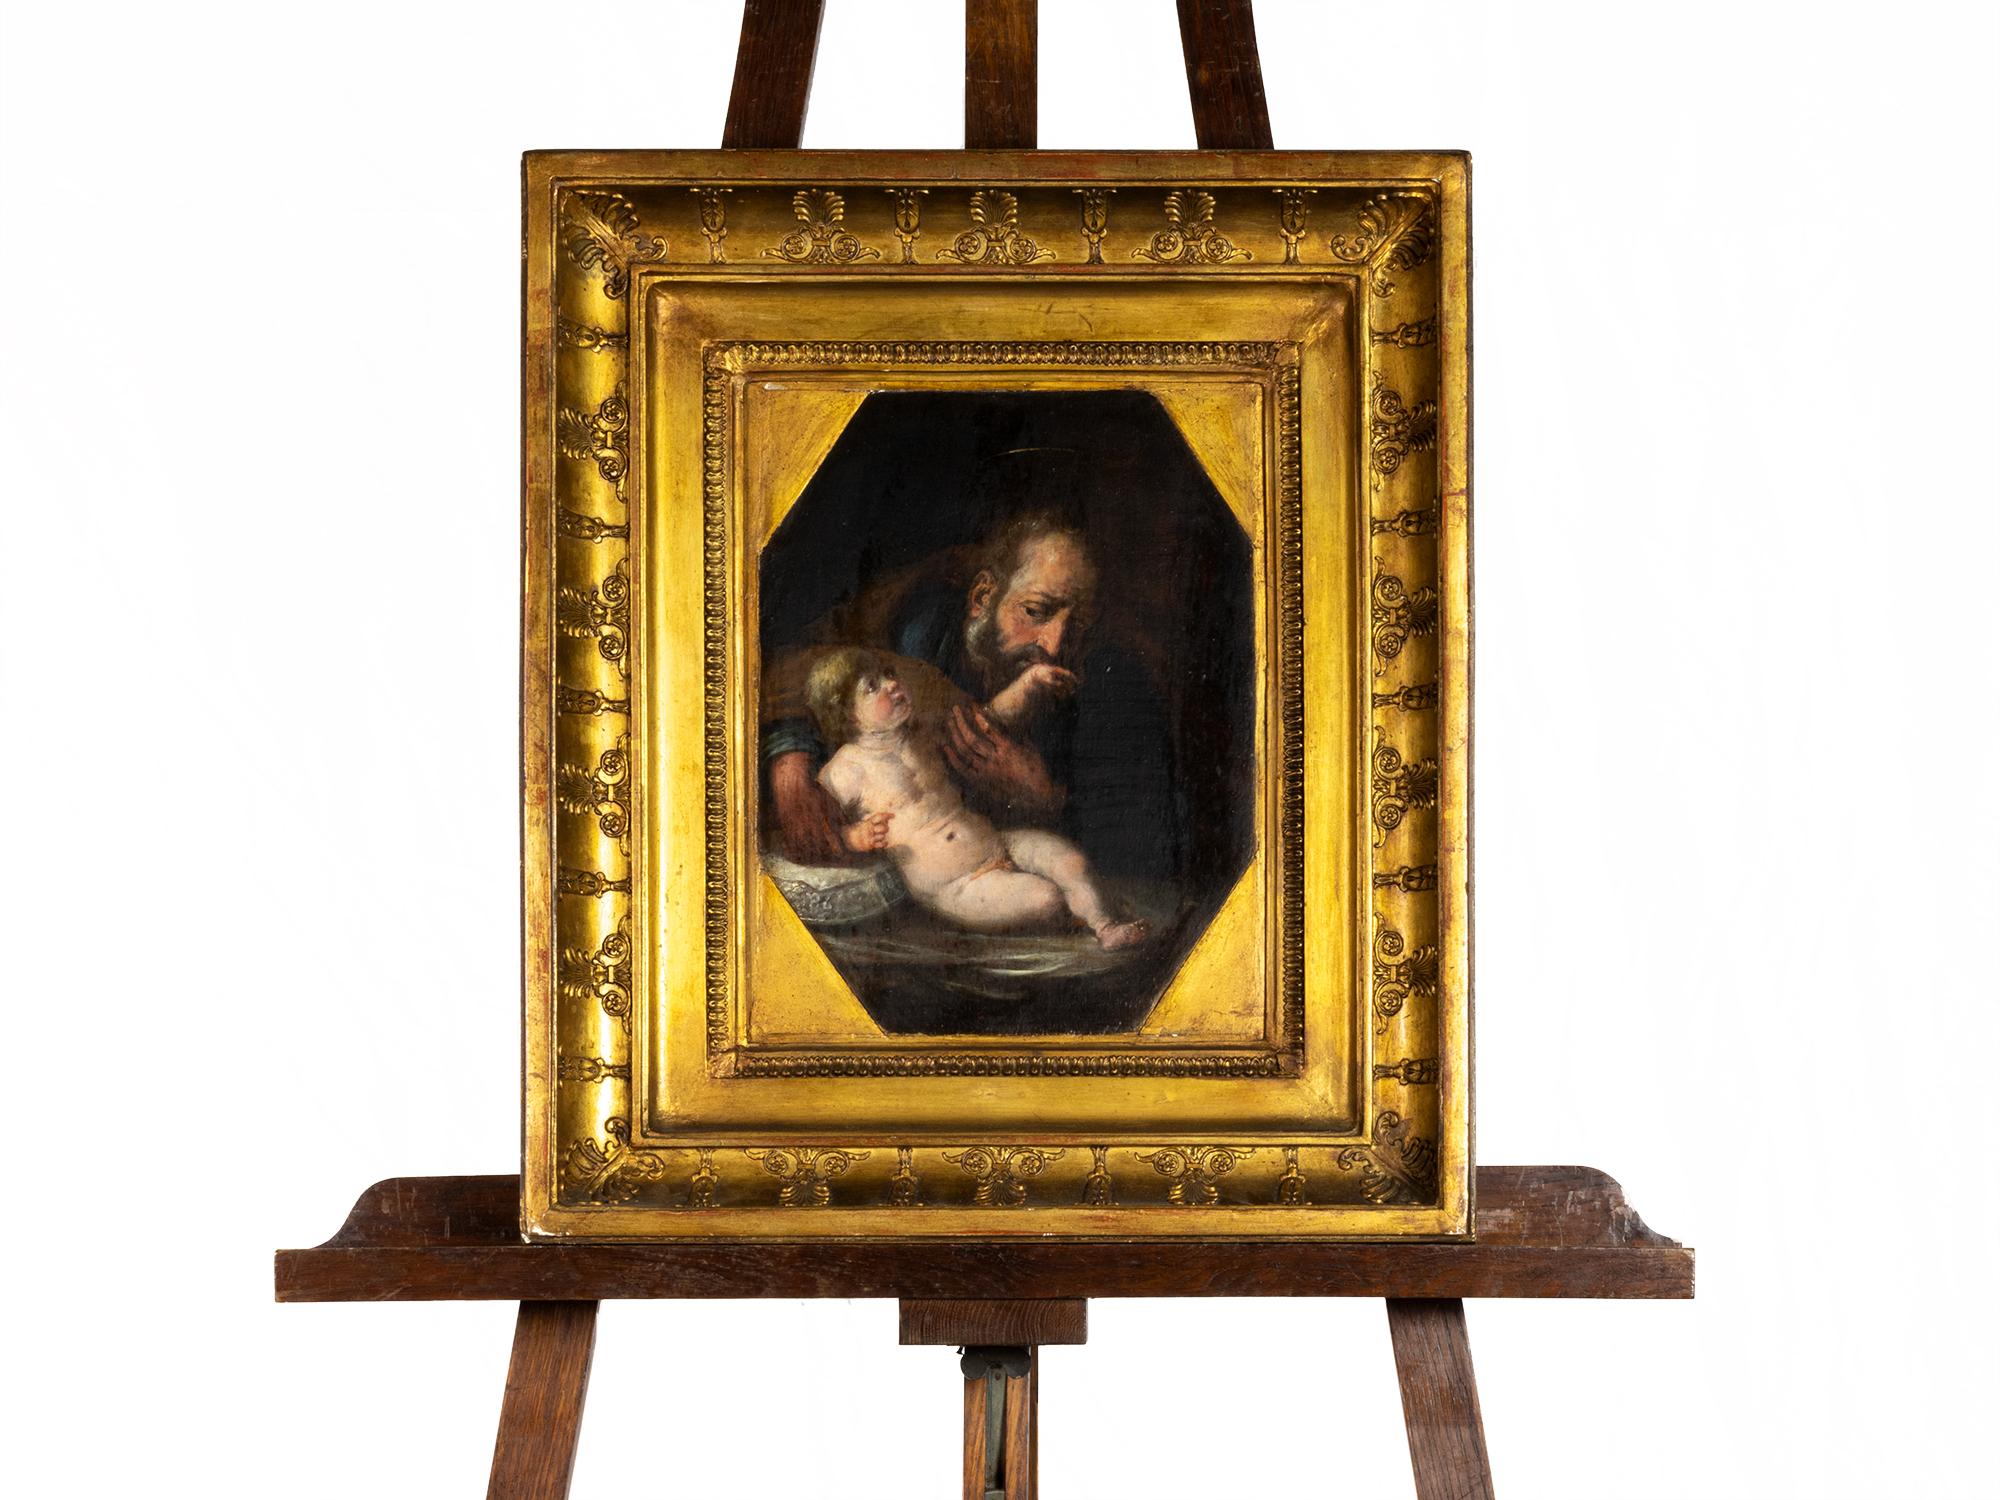 A 17th Century painting of Joseph with the Child Jesus on his lap, a rare Baroque motif of paternal love.

Oil on wood

Frame: 47x54 cm    
Without frame: 27x34 cm